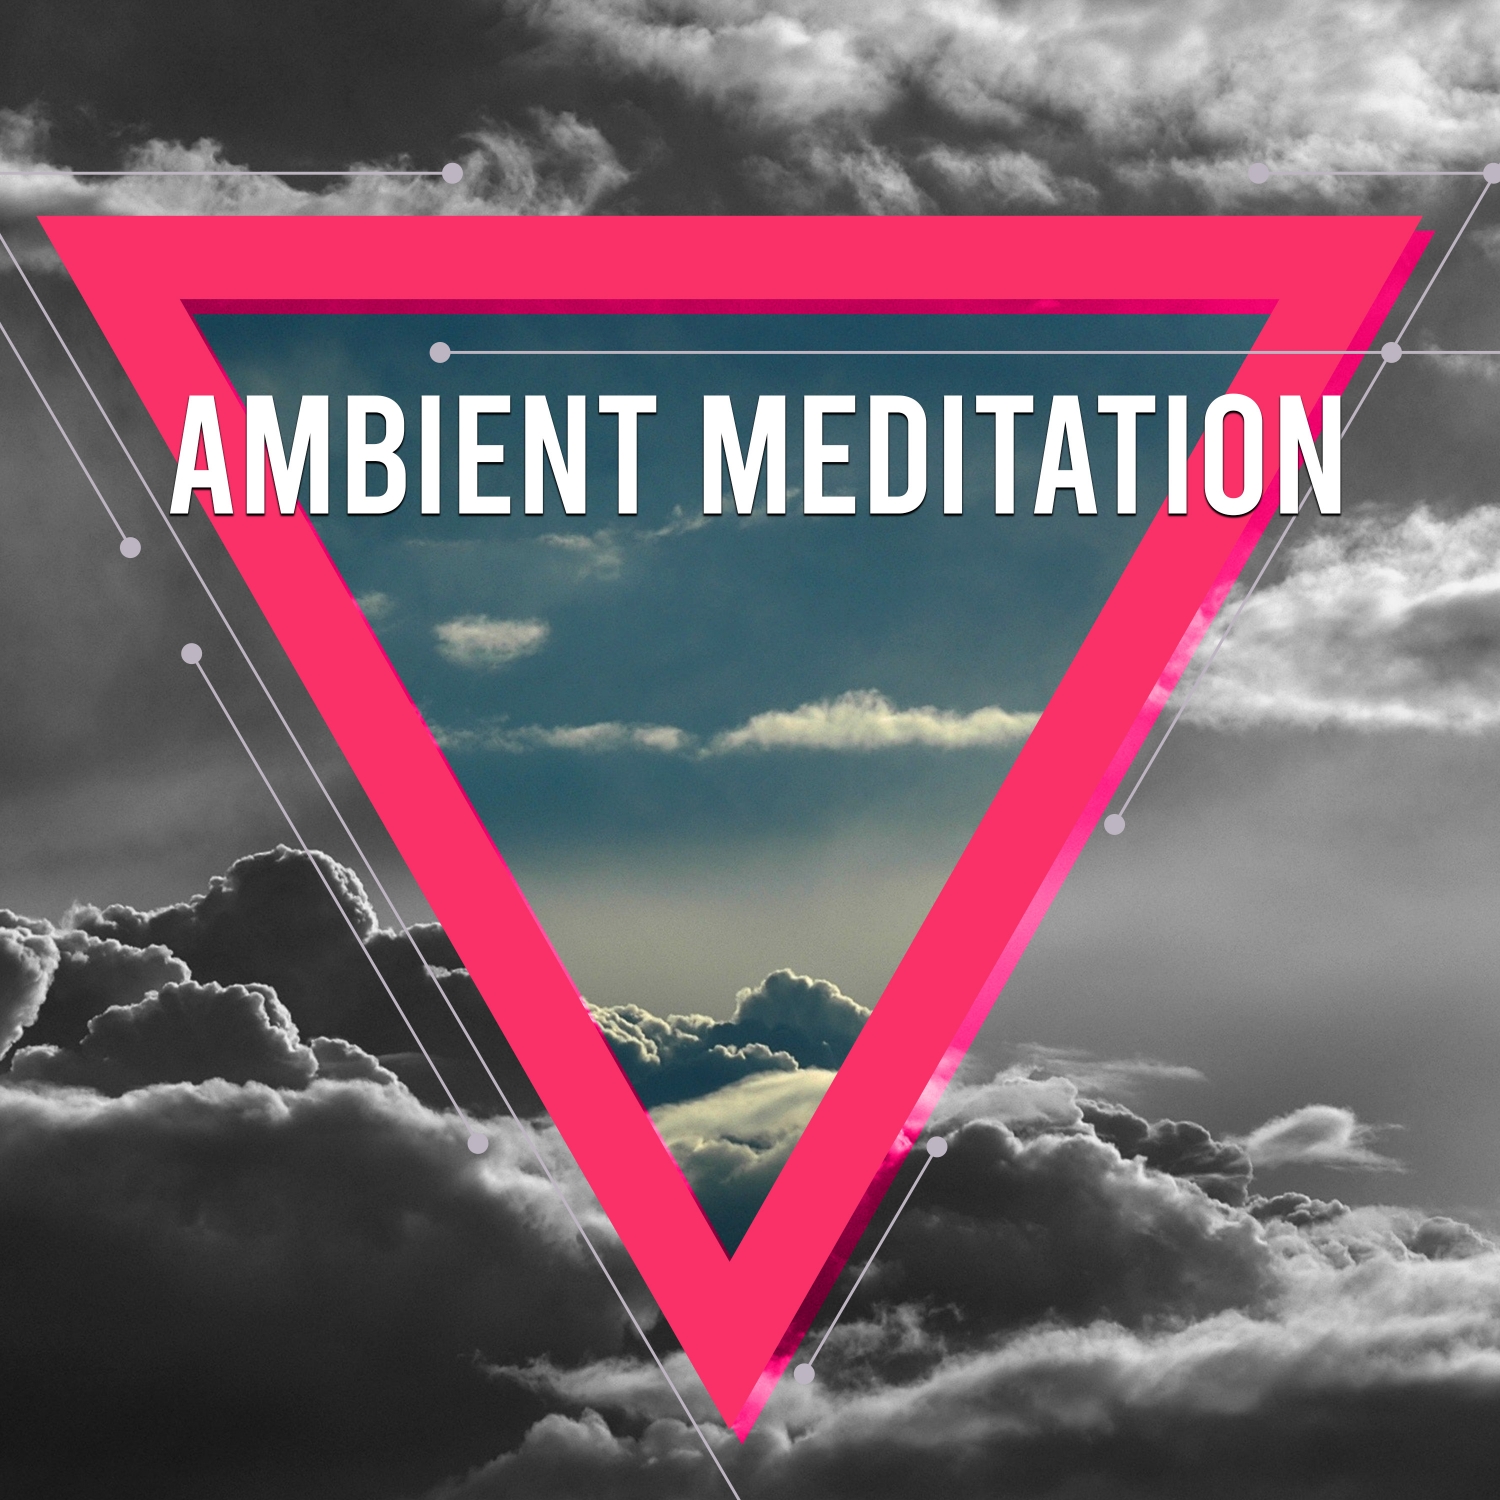 17 Ambient Meditation and Sleep Sounds, Loopable, No Fade